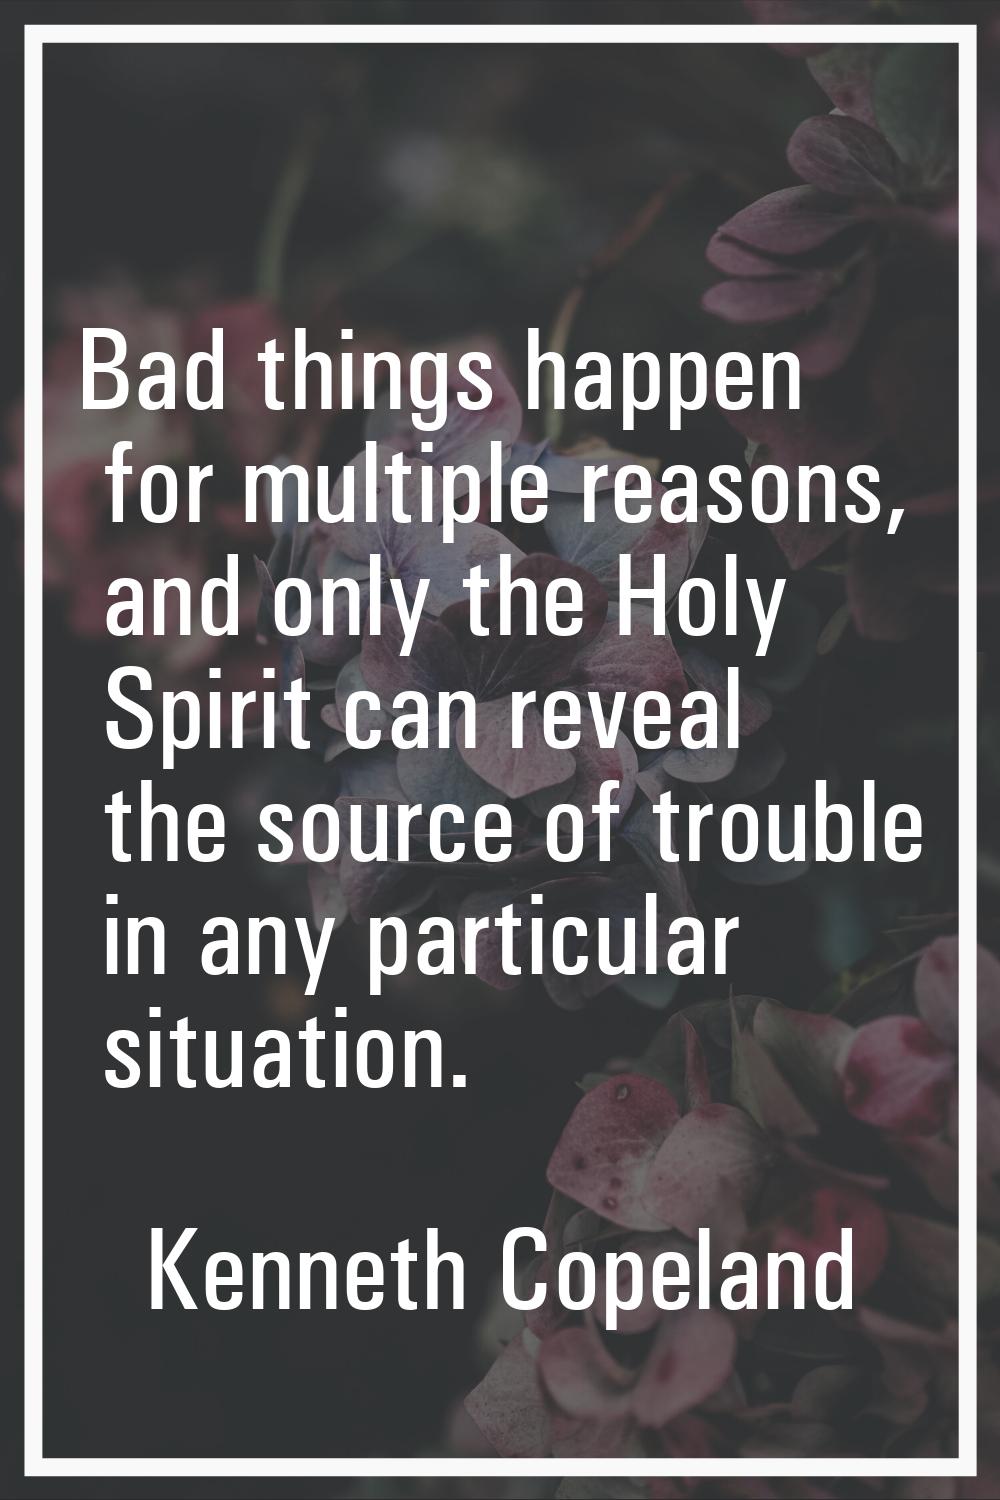 Bad things happen for multiple reasons, and only the Holy Spirit can reveal the source of trouble i